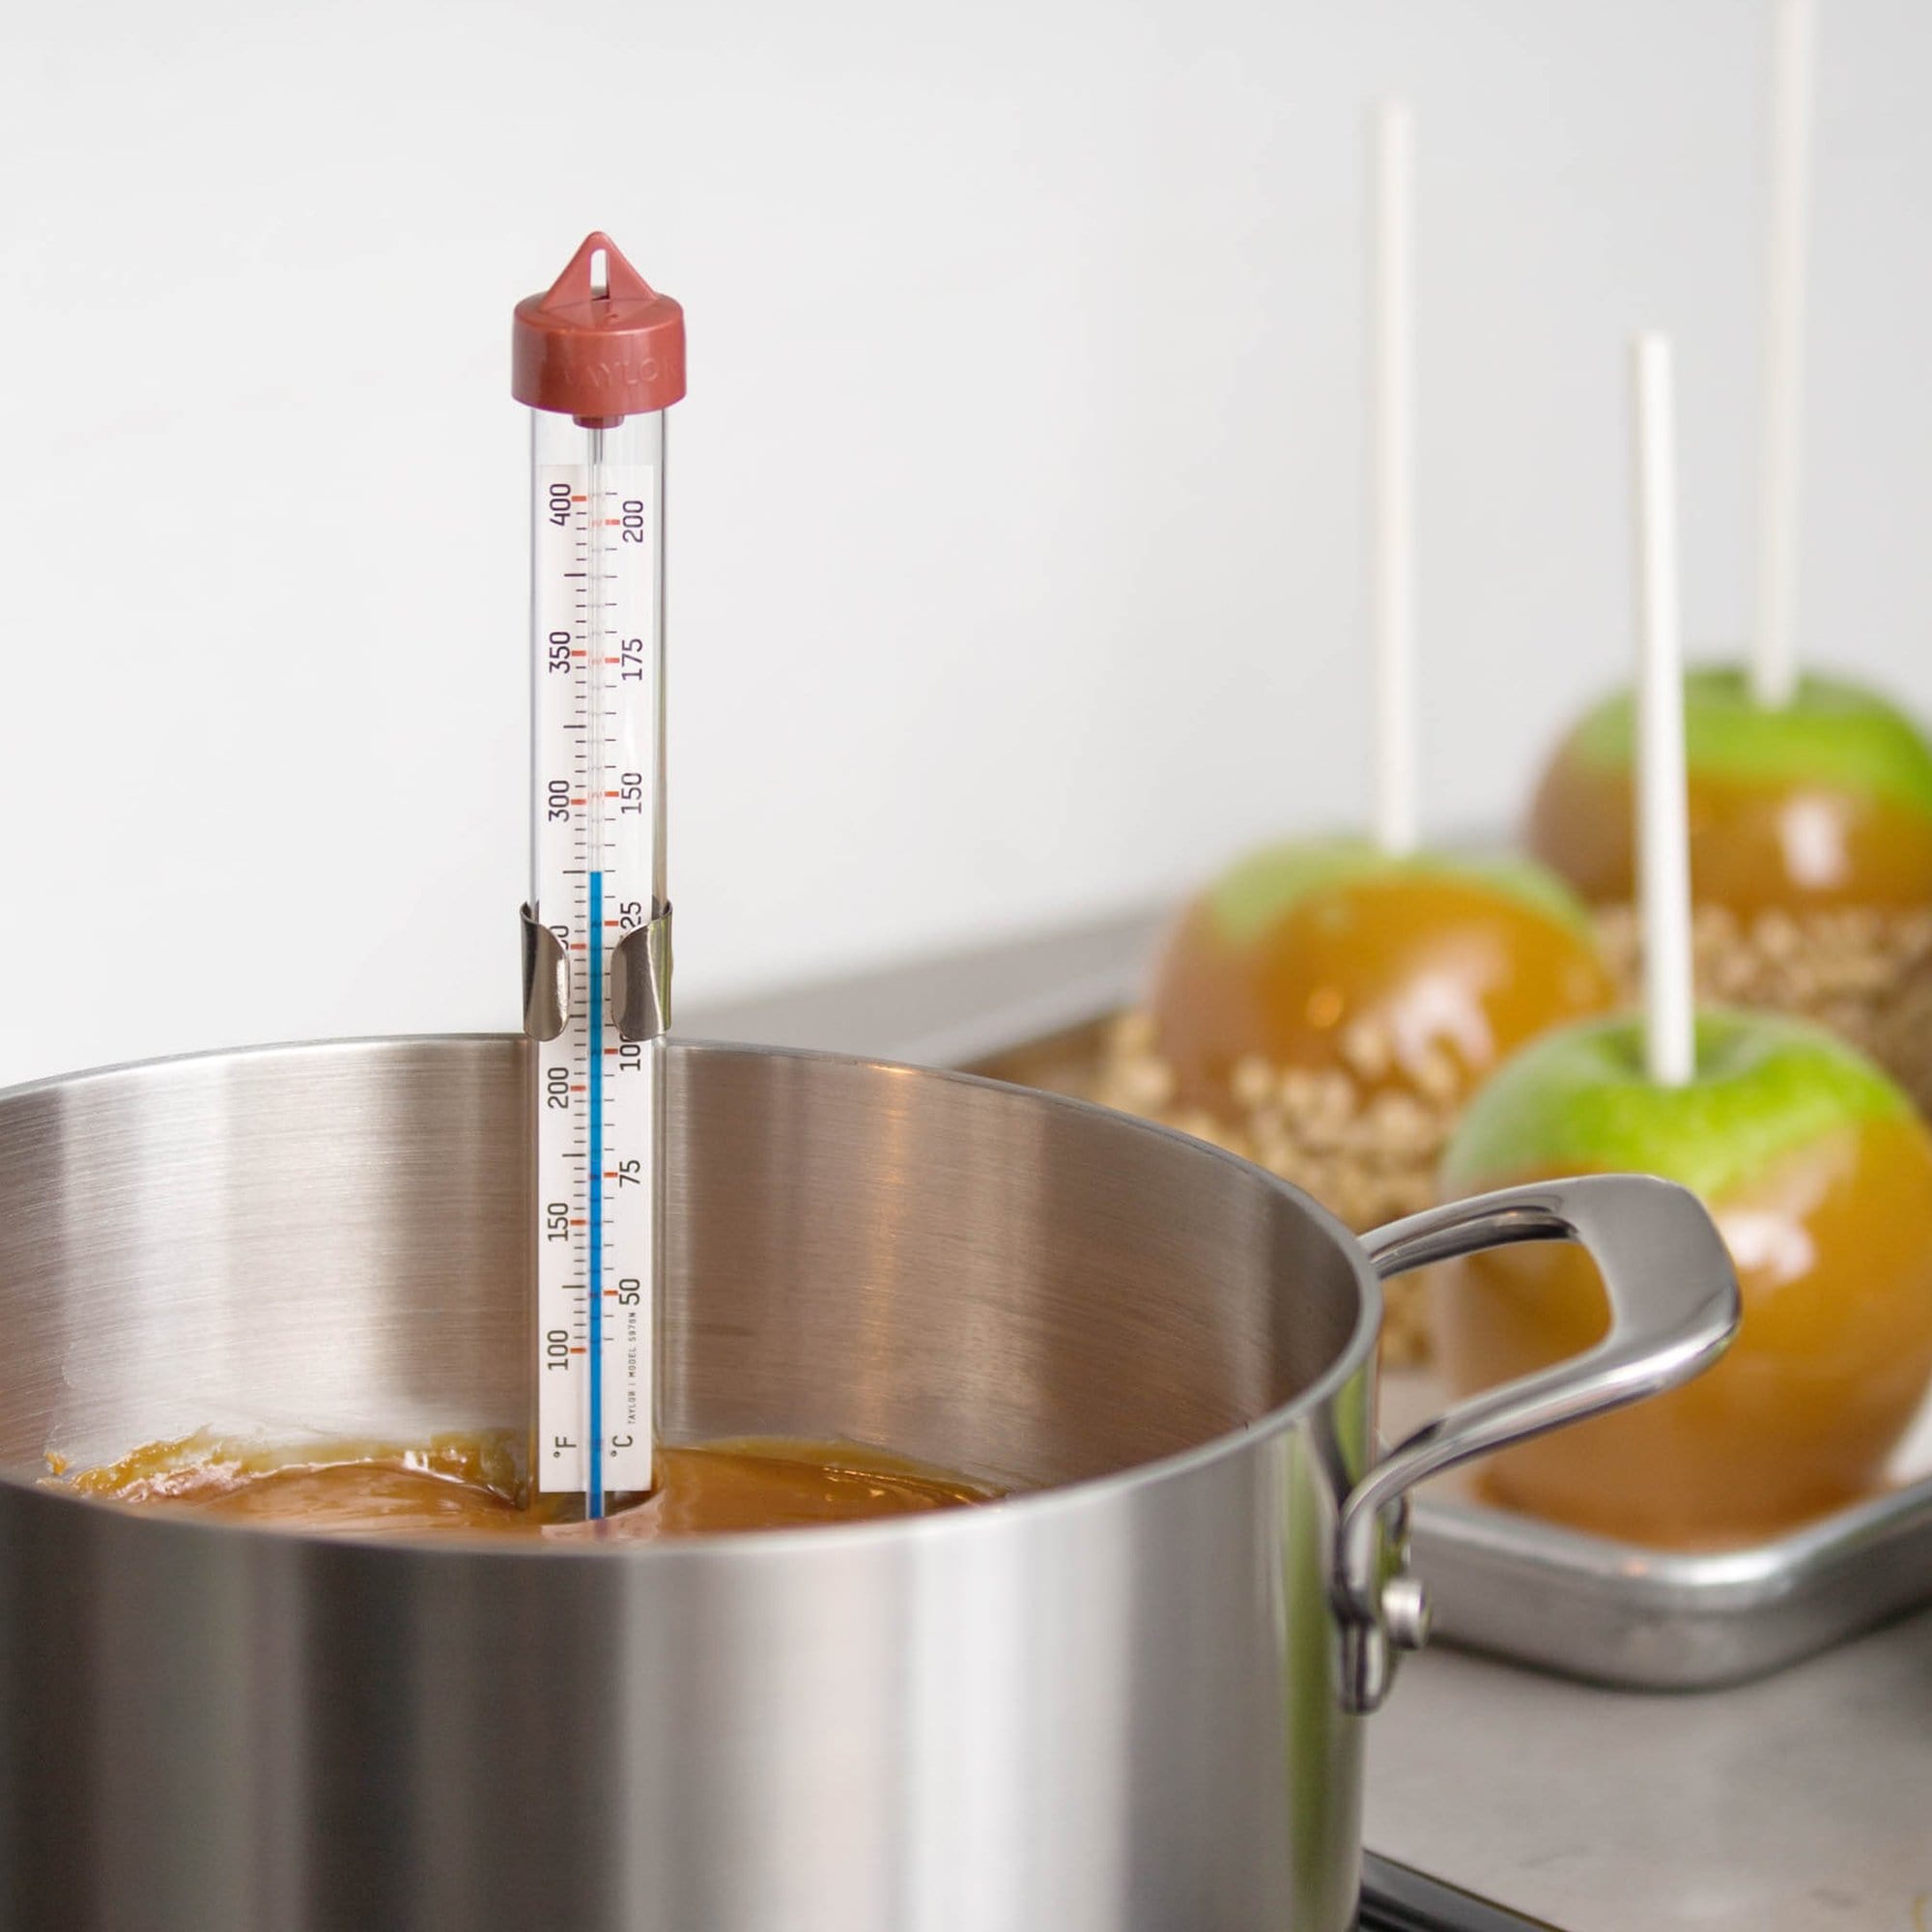 Taylor Digital Candy/Deep Fry Thermometer